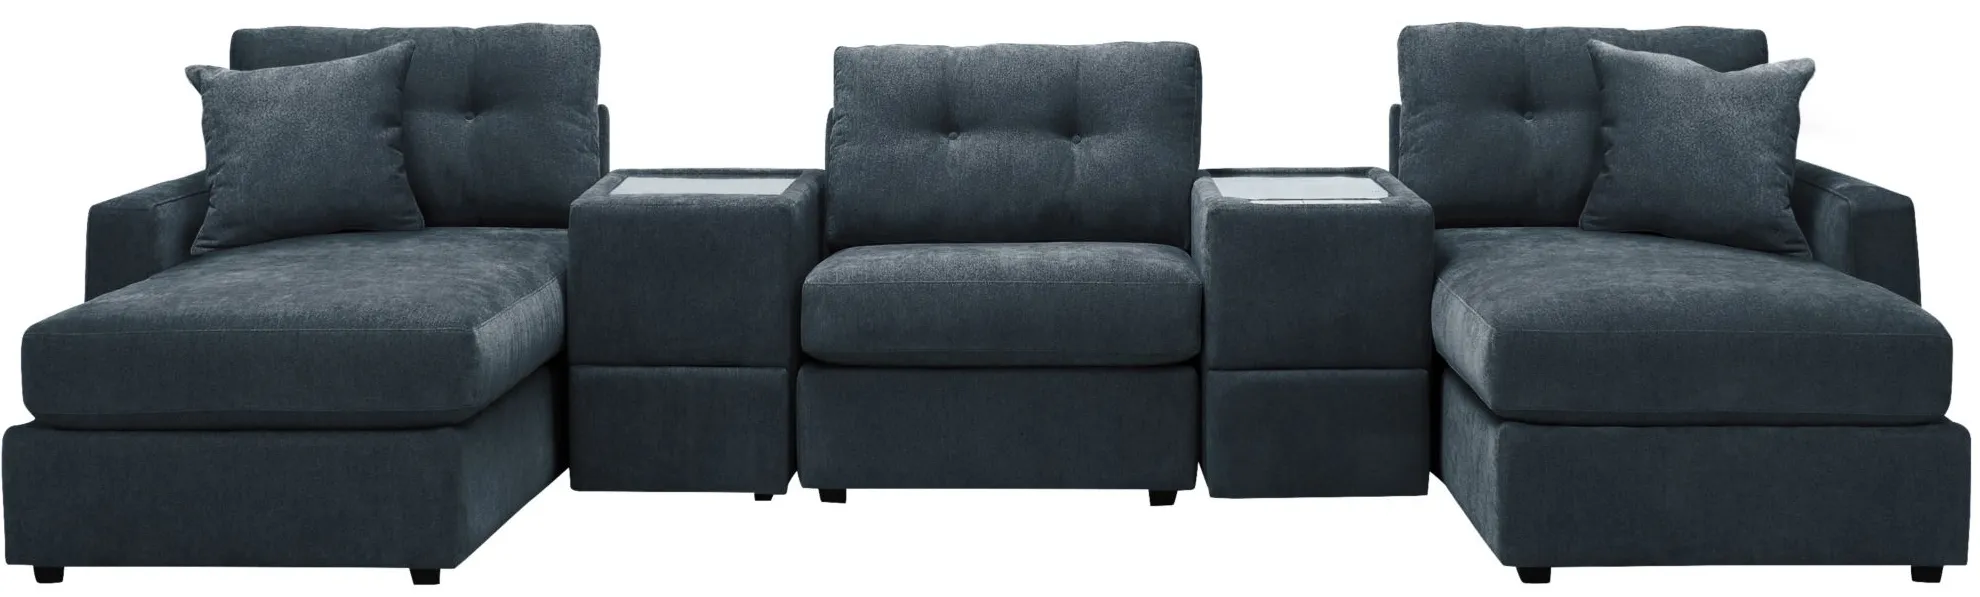 ModularOne 5-pc Sectional w/One Power Console in Navy by H.M. Richards